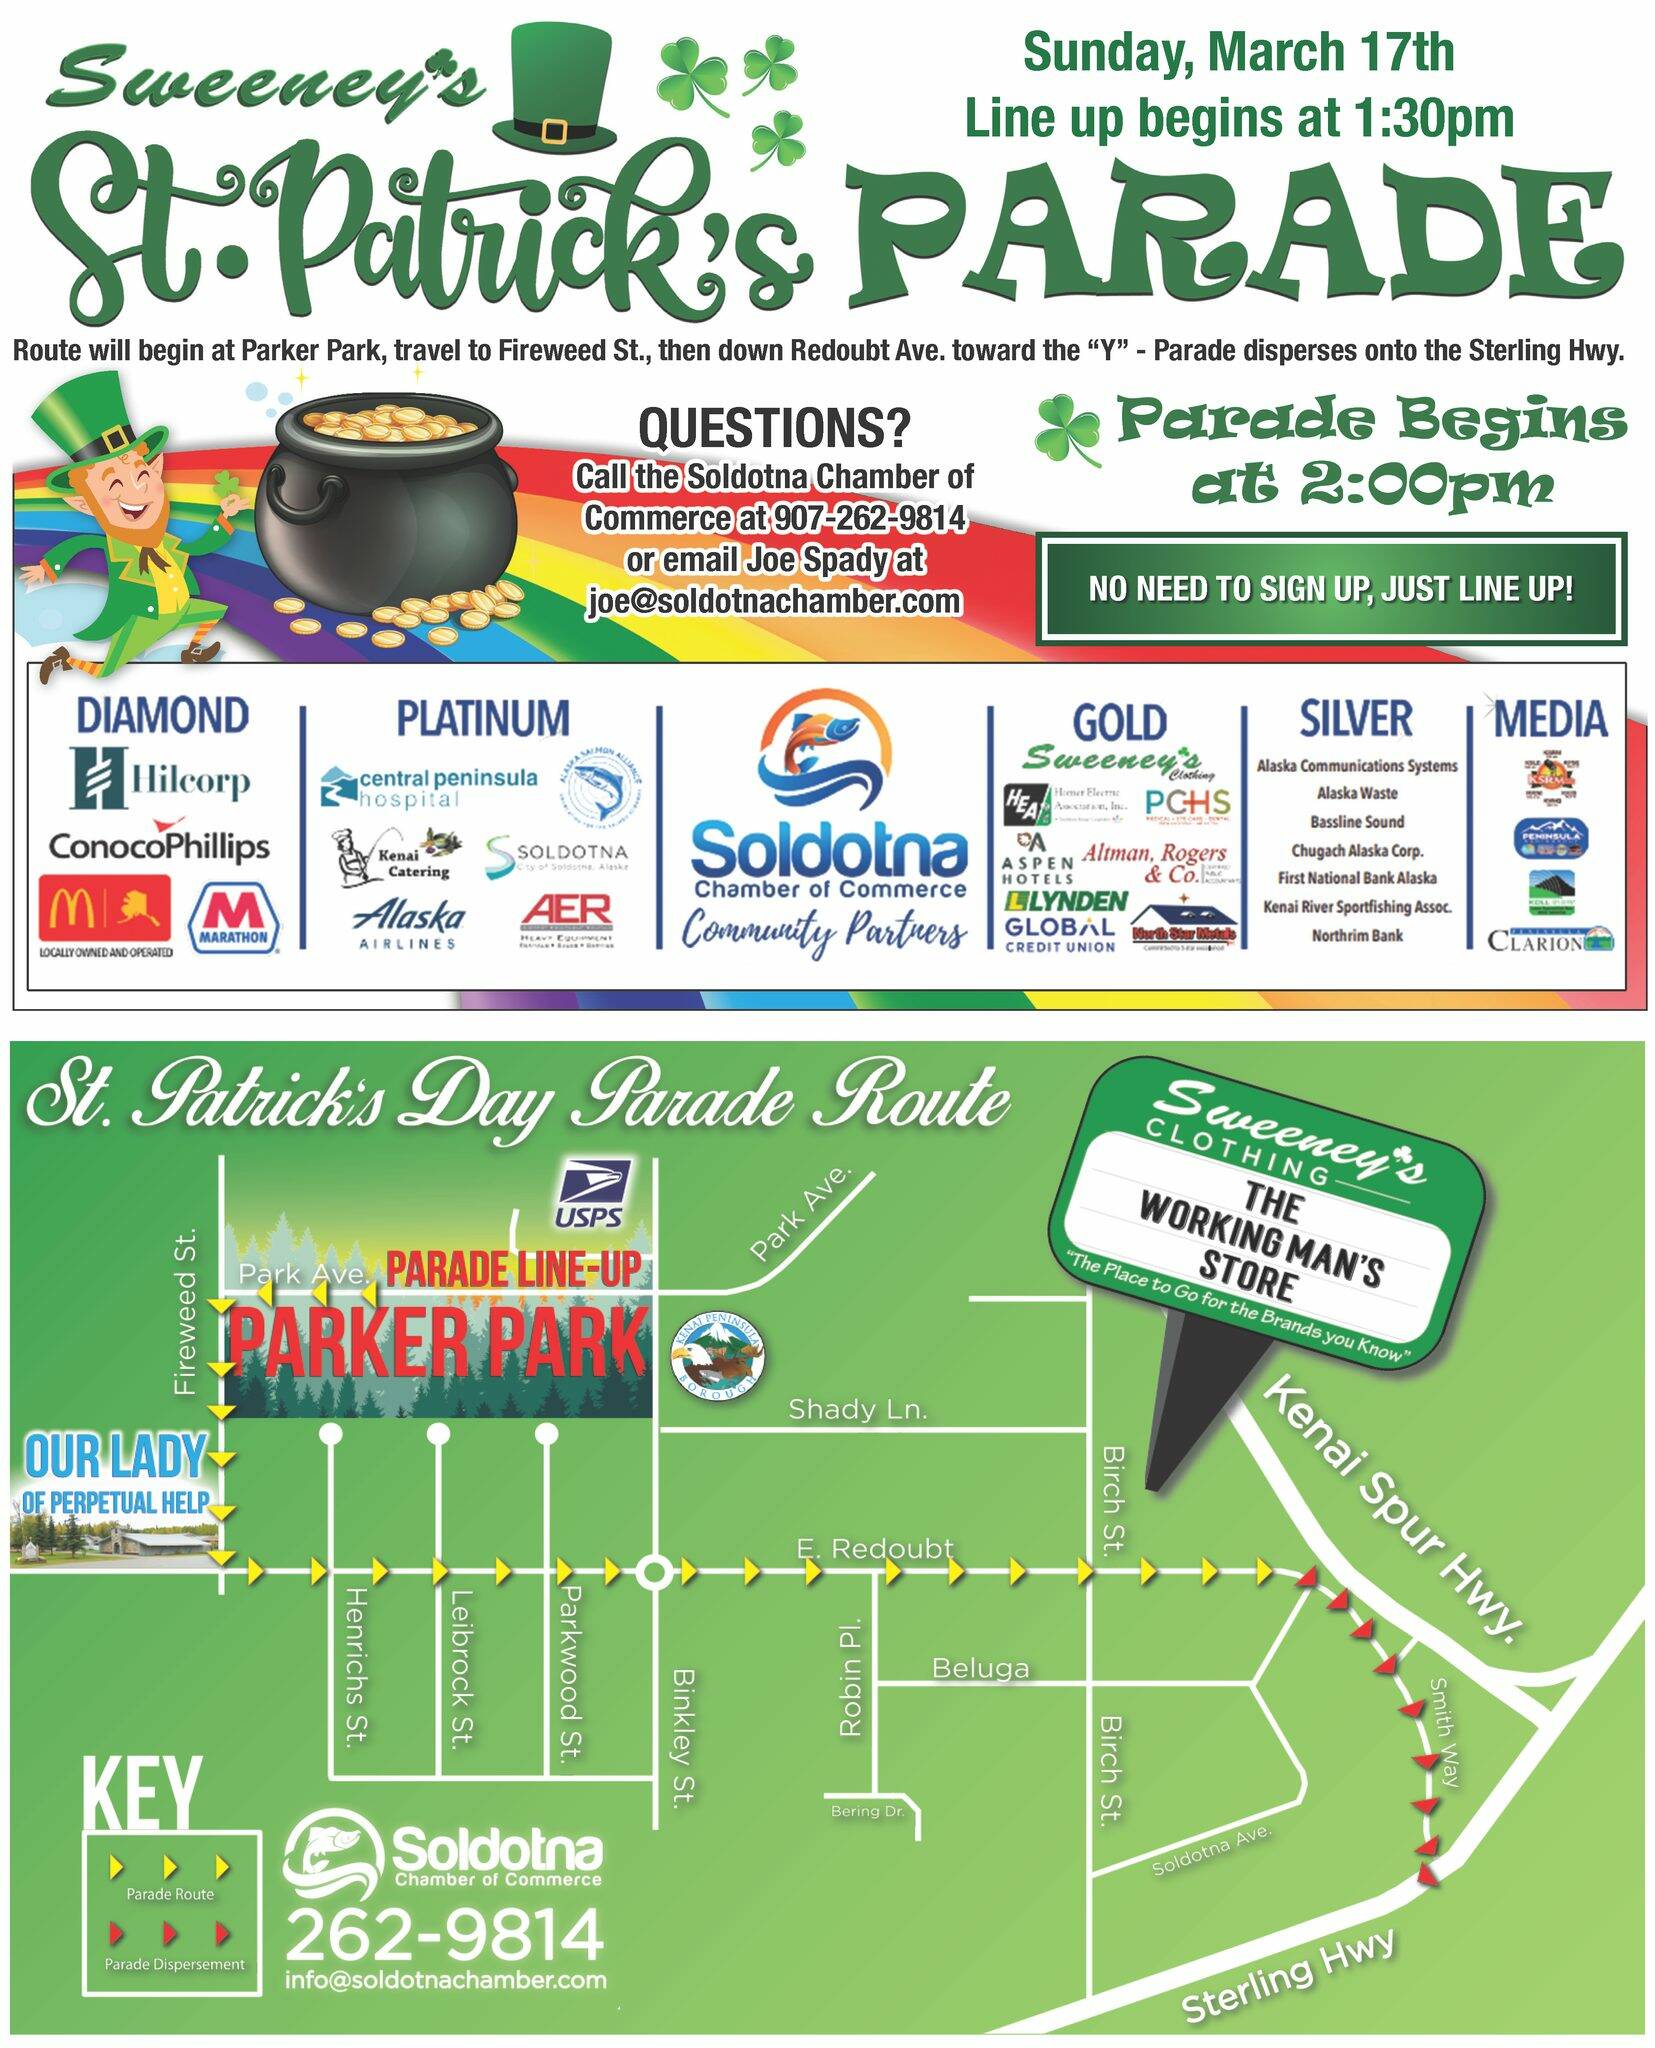 A flier displays information and a map for the Sweeney’s St. Patrick’s Day Parade. (Promotional image courtesy Soldotna Chamber of Commerce)